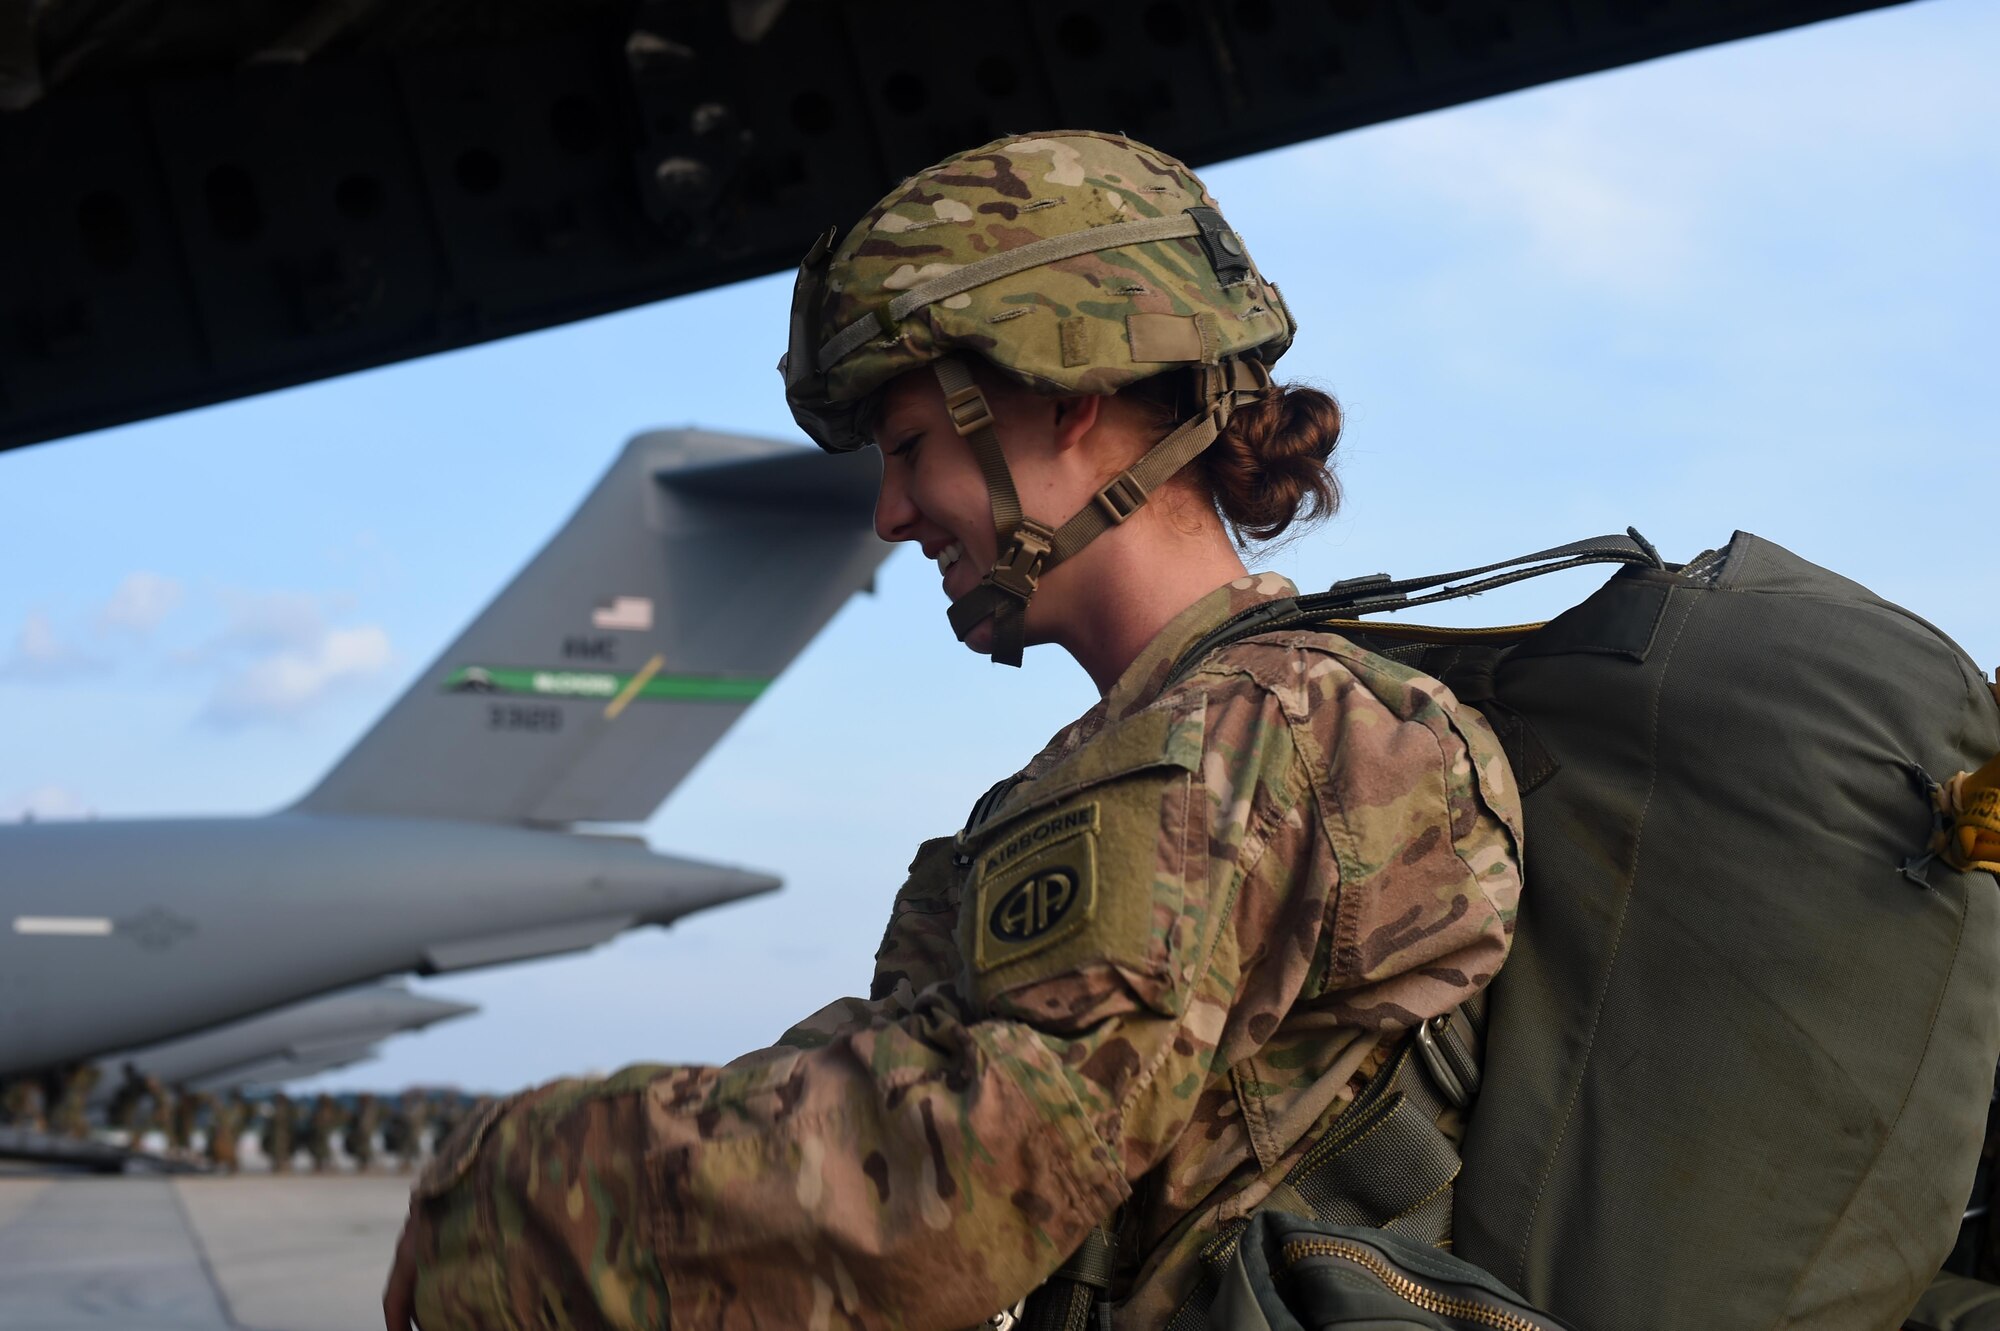 An 82nd Airborne Division Soldier boards a C-17 Globemaster III at Pope Army Air Field, North Carolina, June 4, 2016. Hundreds of Soldiers with the 82nd Airborne Division conducted a static line jump out of seven C-17s including three from Joint Base Lewis-McChord, Washington and from Joint Base Charleston, S.C. (U.S. Air Force photo/ Staff Sgt. Naomi Shipley)